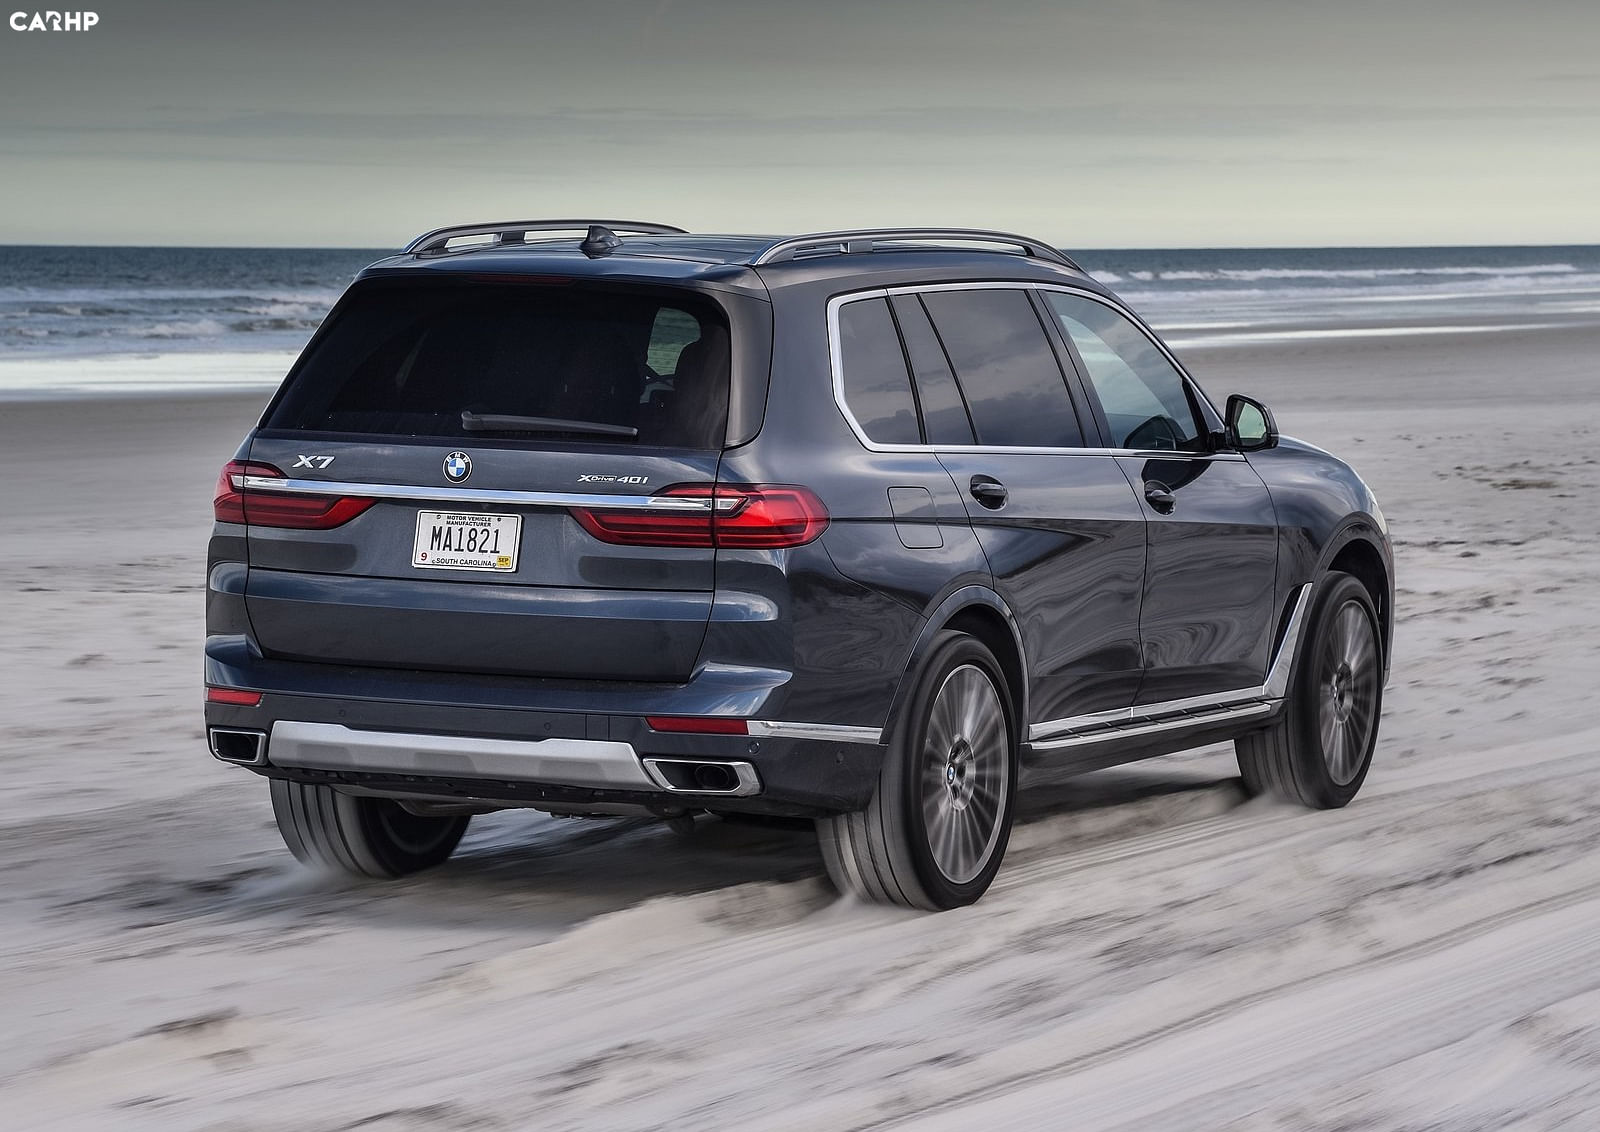 2022 Bmw X7 0-60, Top Speed And Quarter-Mile | Carhp